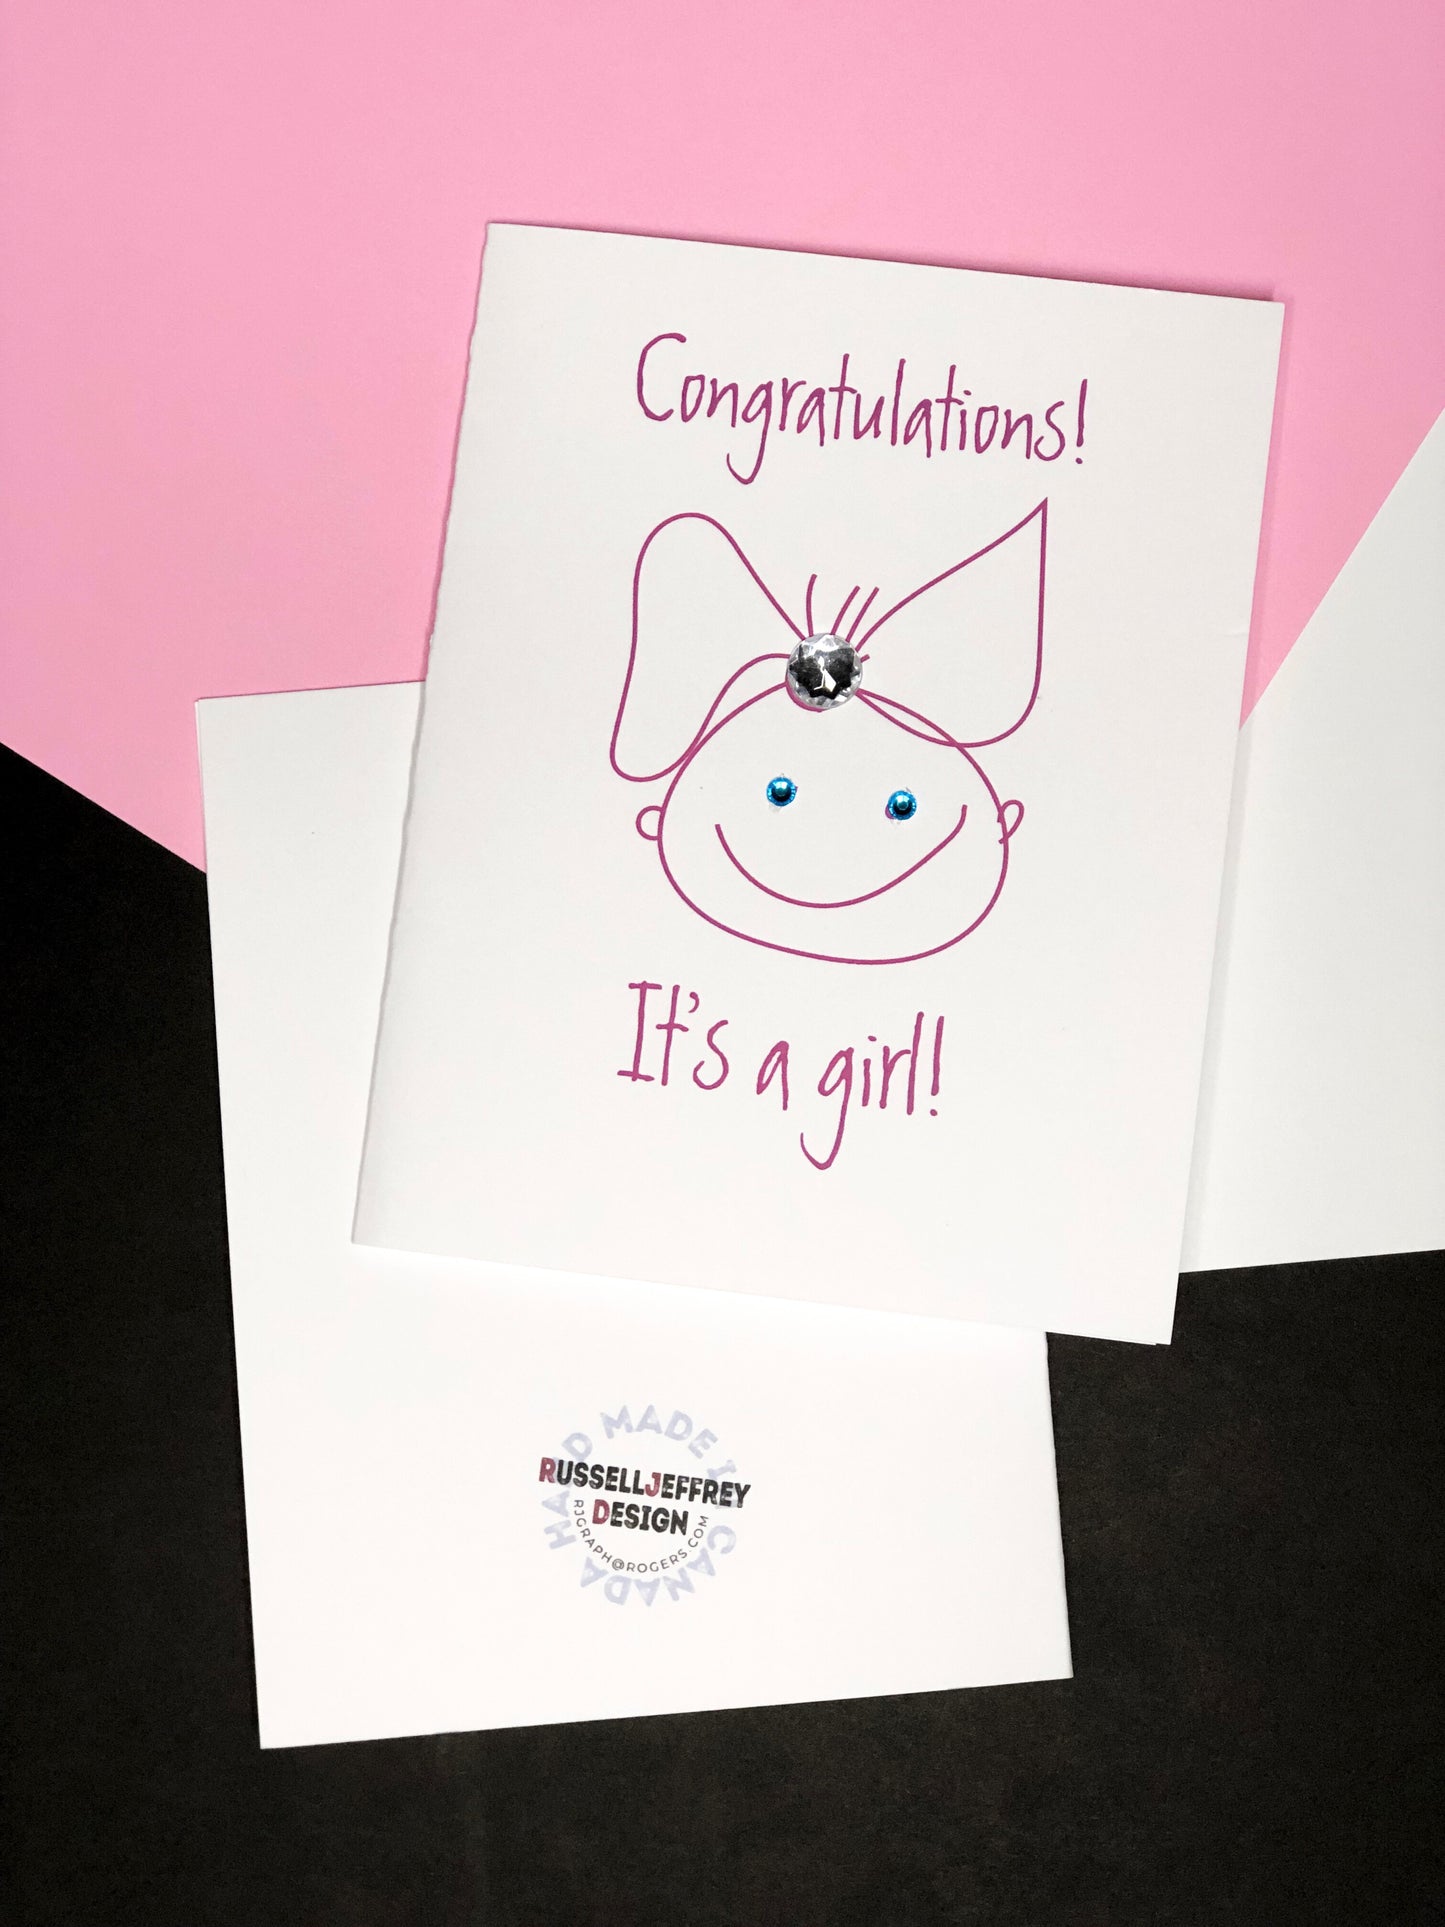 Congratulations! It's a Girl! Greeting Card